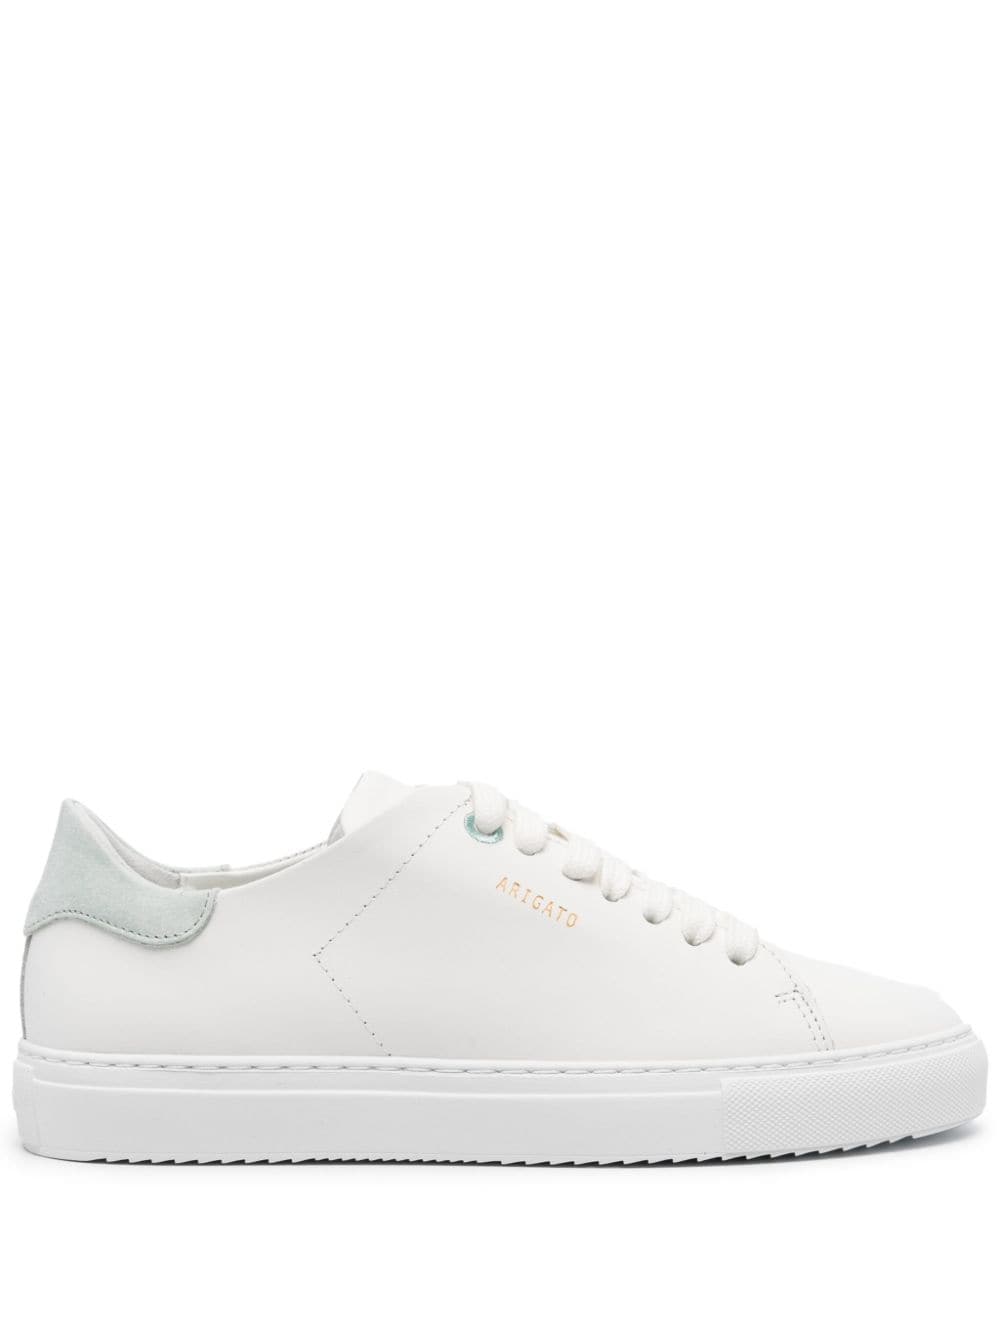 Image 1 of Axel Arigato Clean 90 leather sneakers